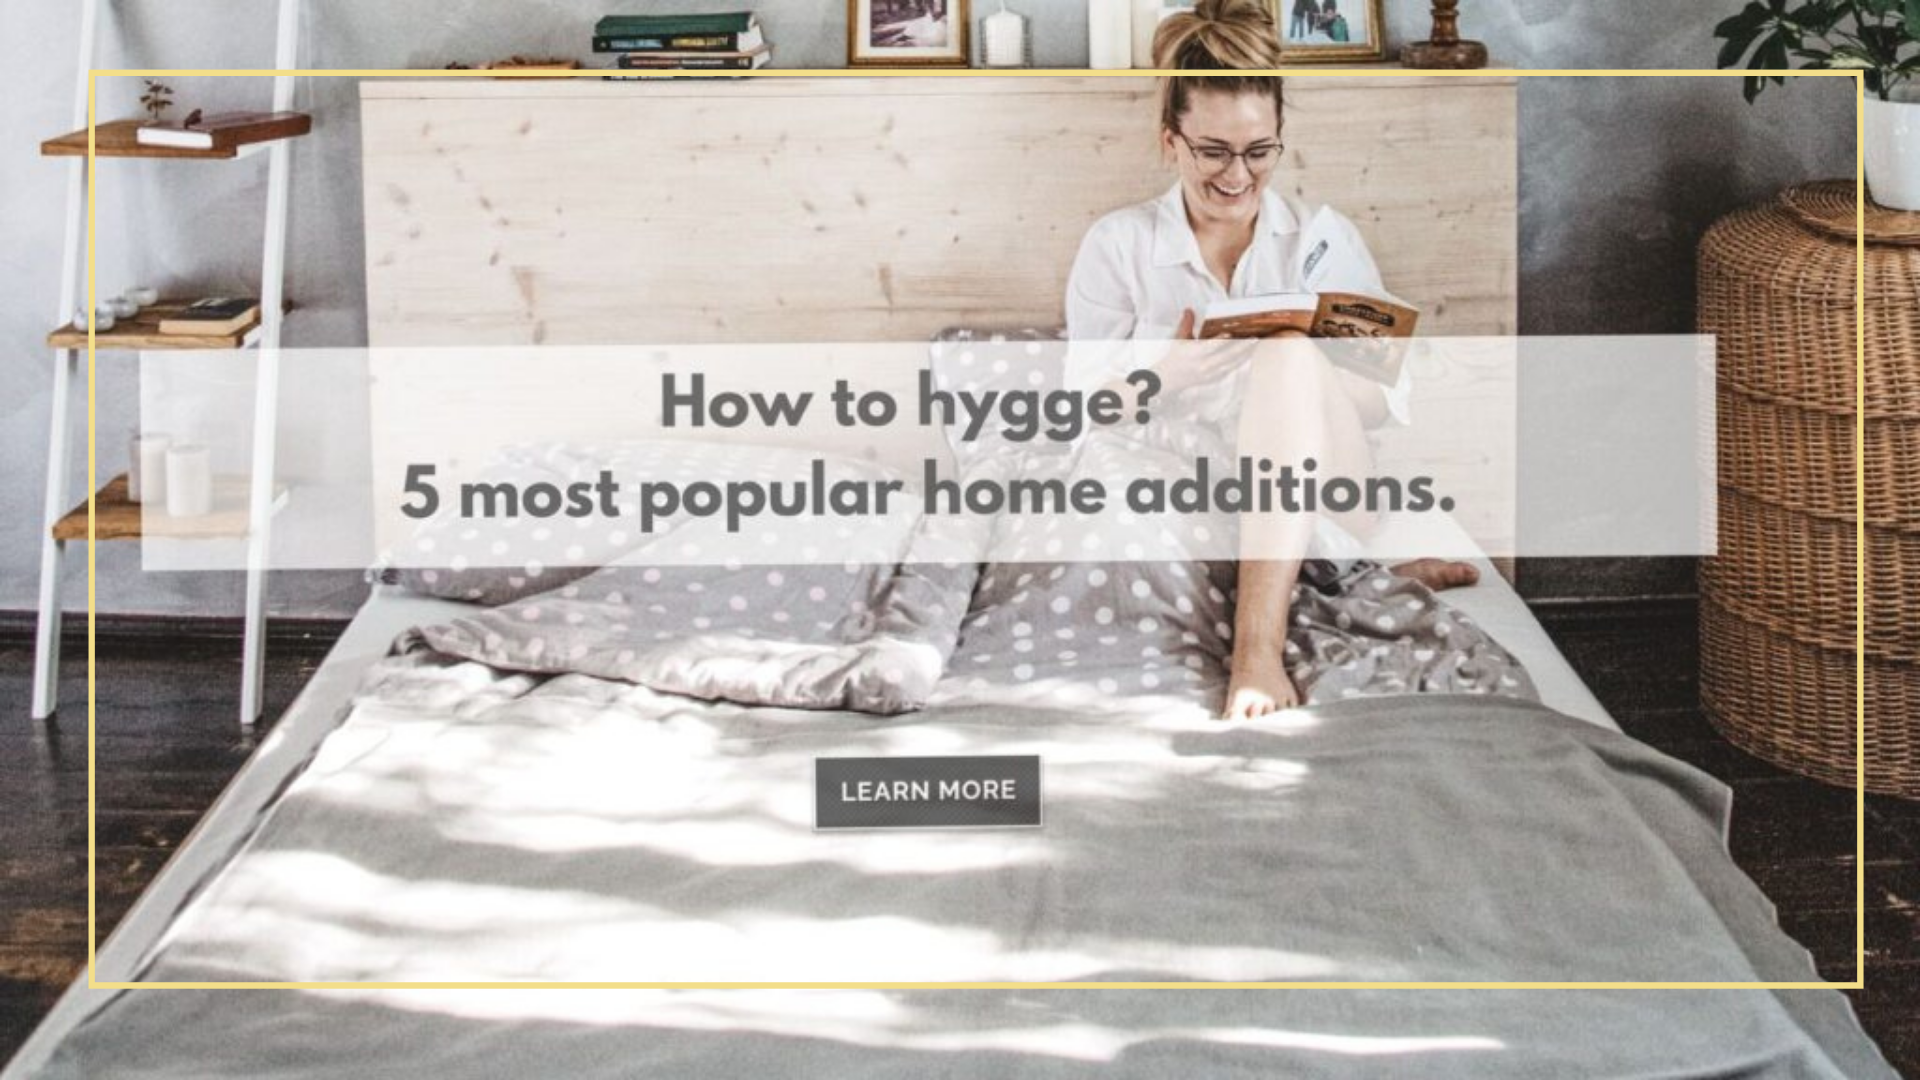 How to Hygge_ 5 most popular additions according to this philosophy